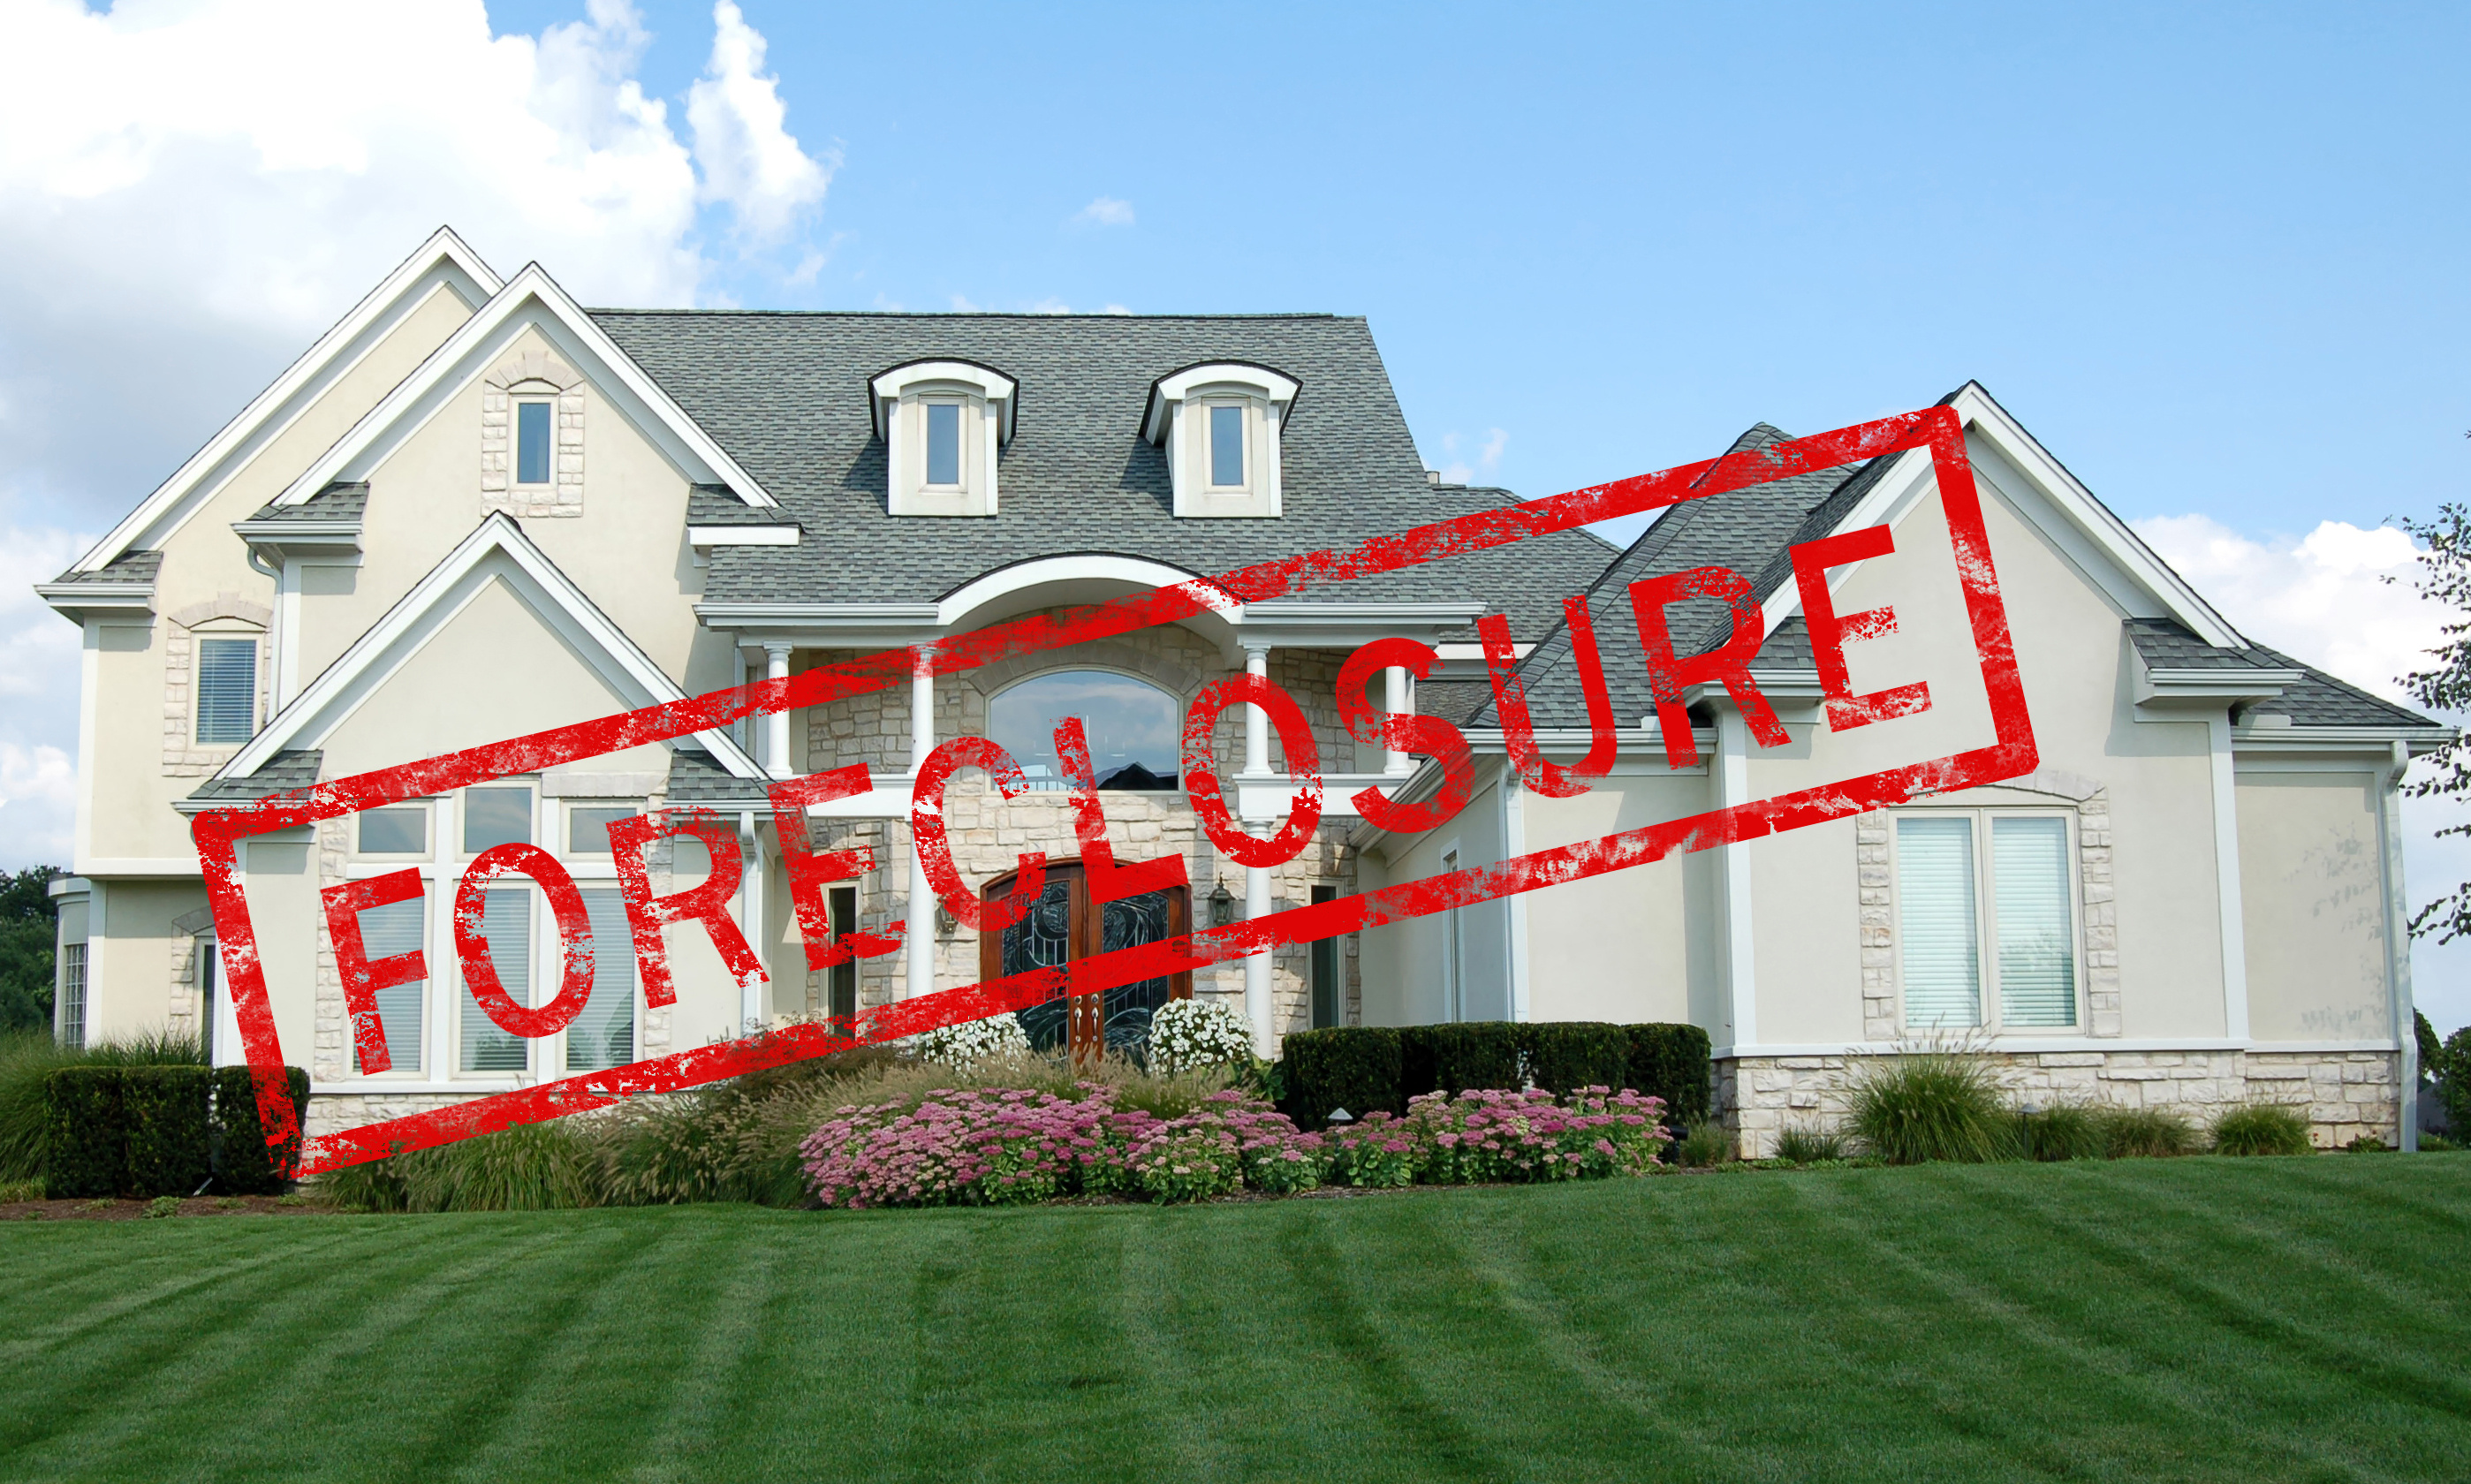 Call Timeline Appraisal Services, LLC when you need valuations of Maricopa foreclosures